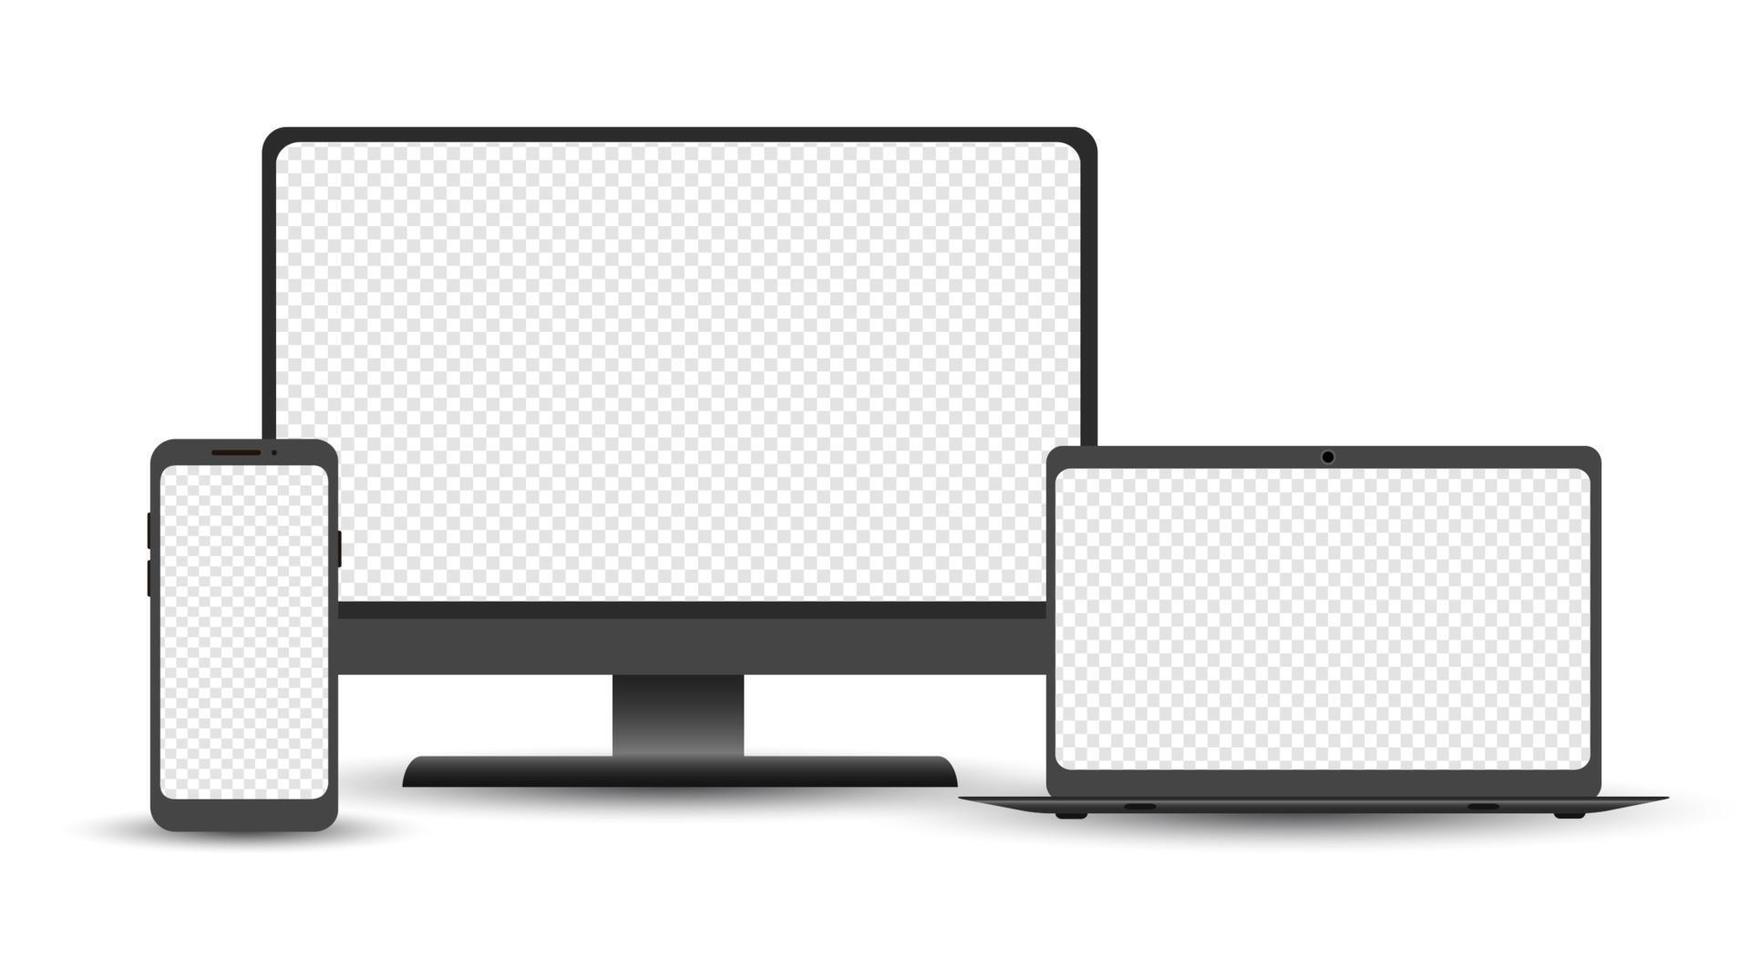 Device set - desktop, laptop and smartphone template. Electronic gadgets isolated on white background. Realistic vector illustration.